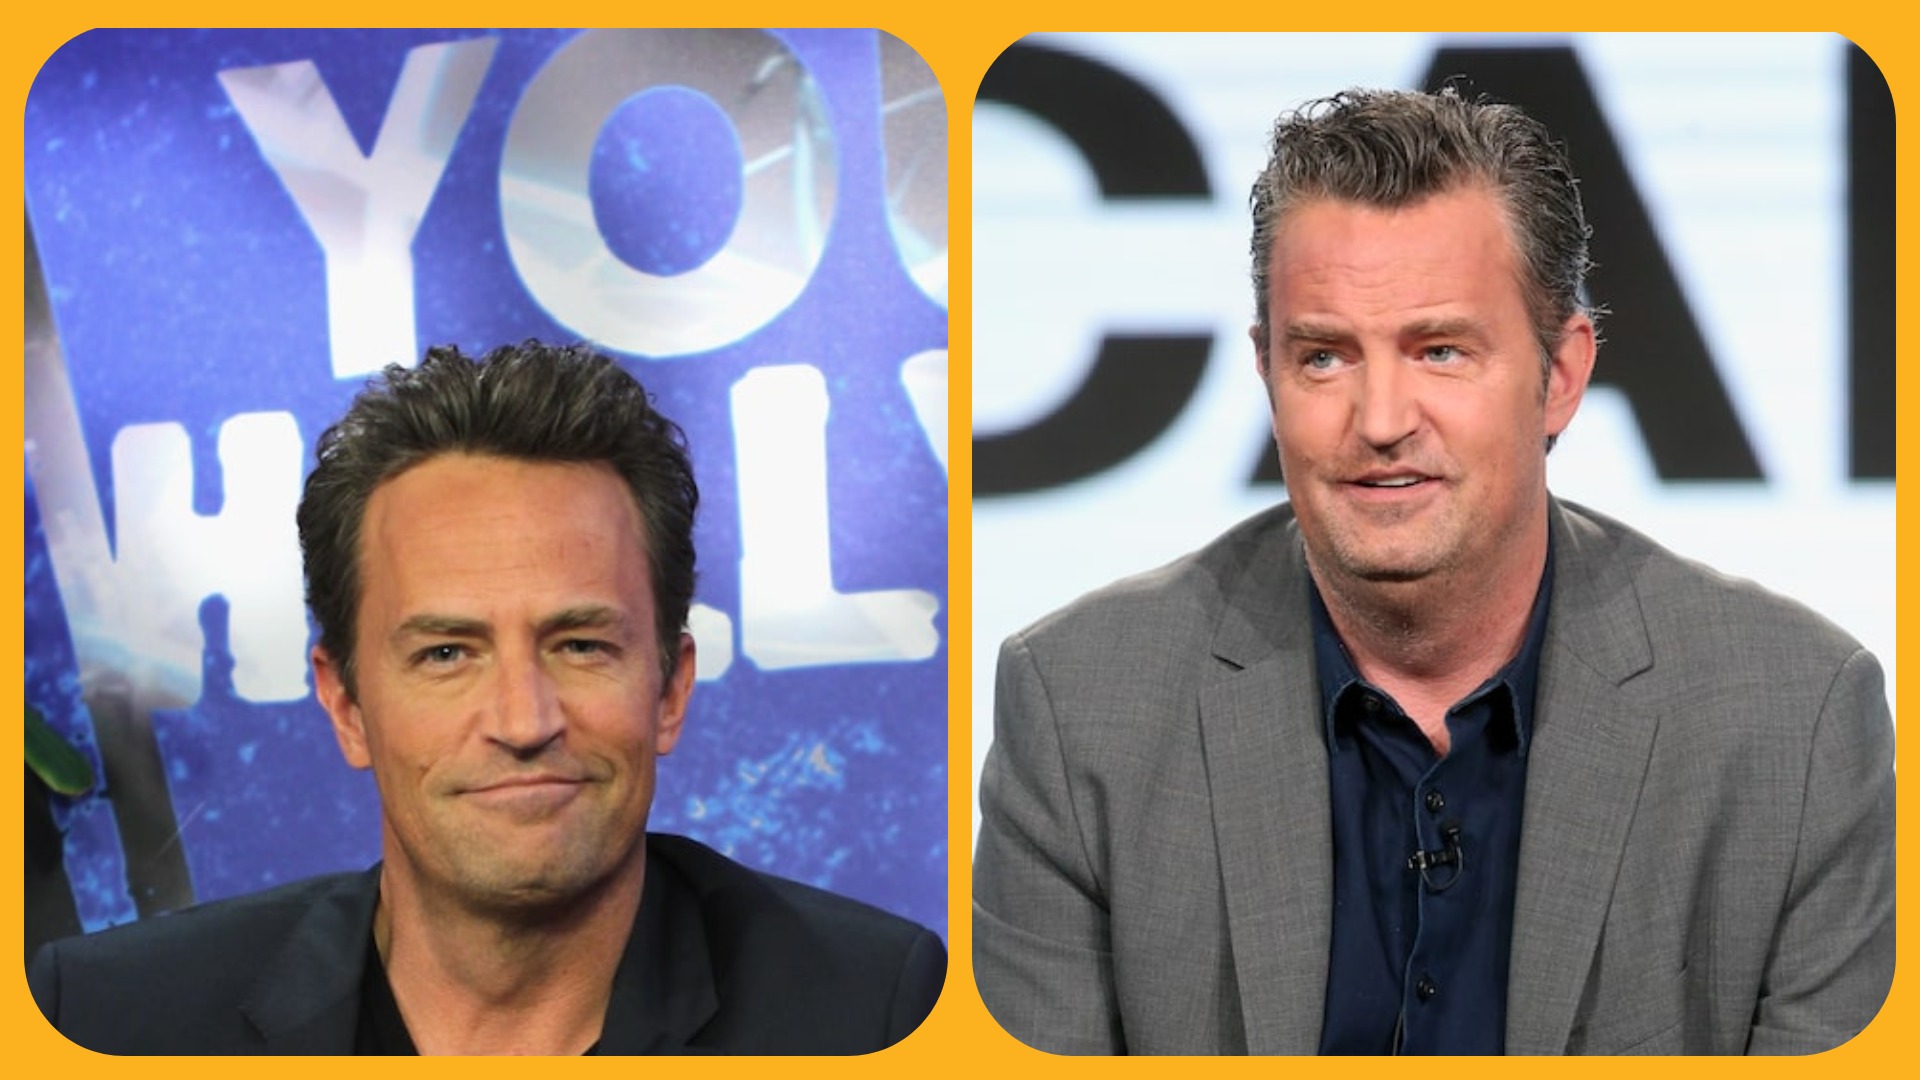 Matthew Perry’s Will, Trust & Beneficiary Details Revealed